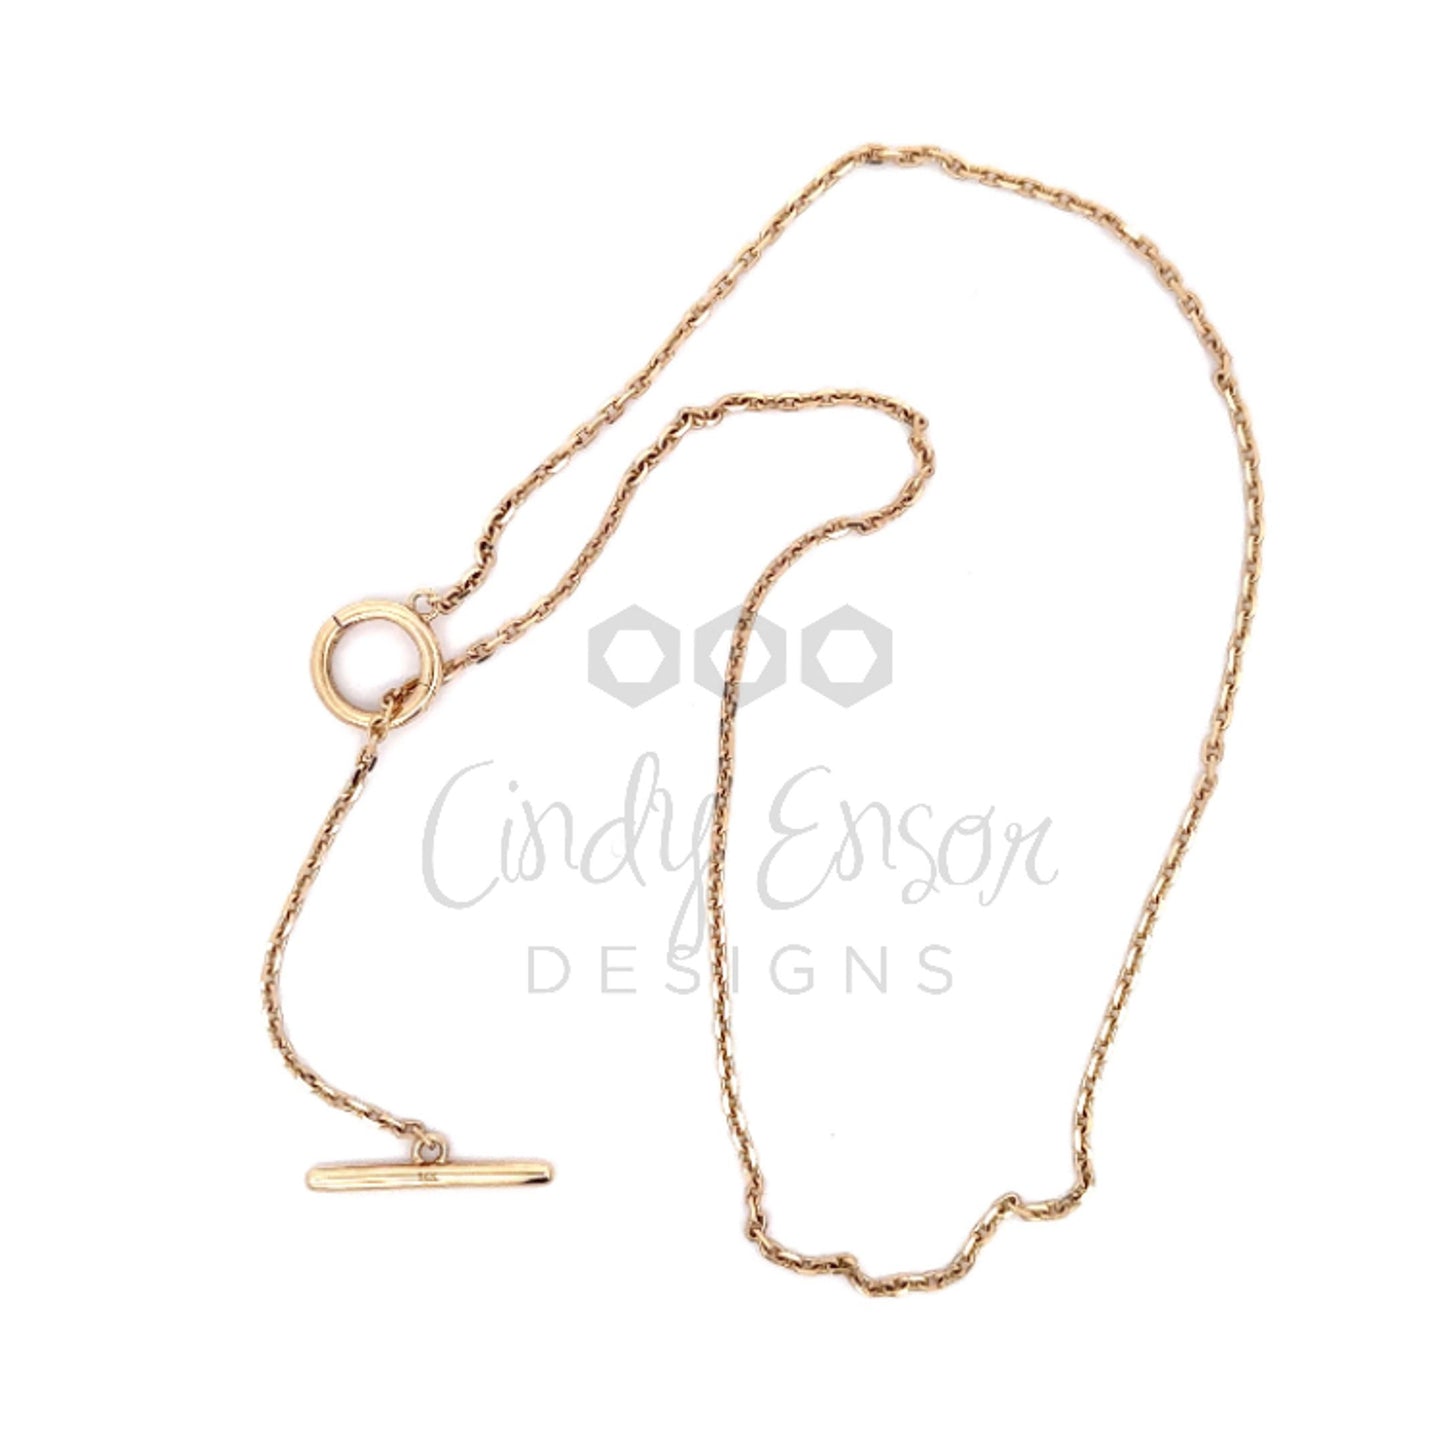 Rope Chain Necklace with Toggle